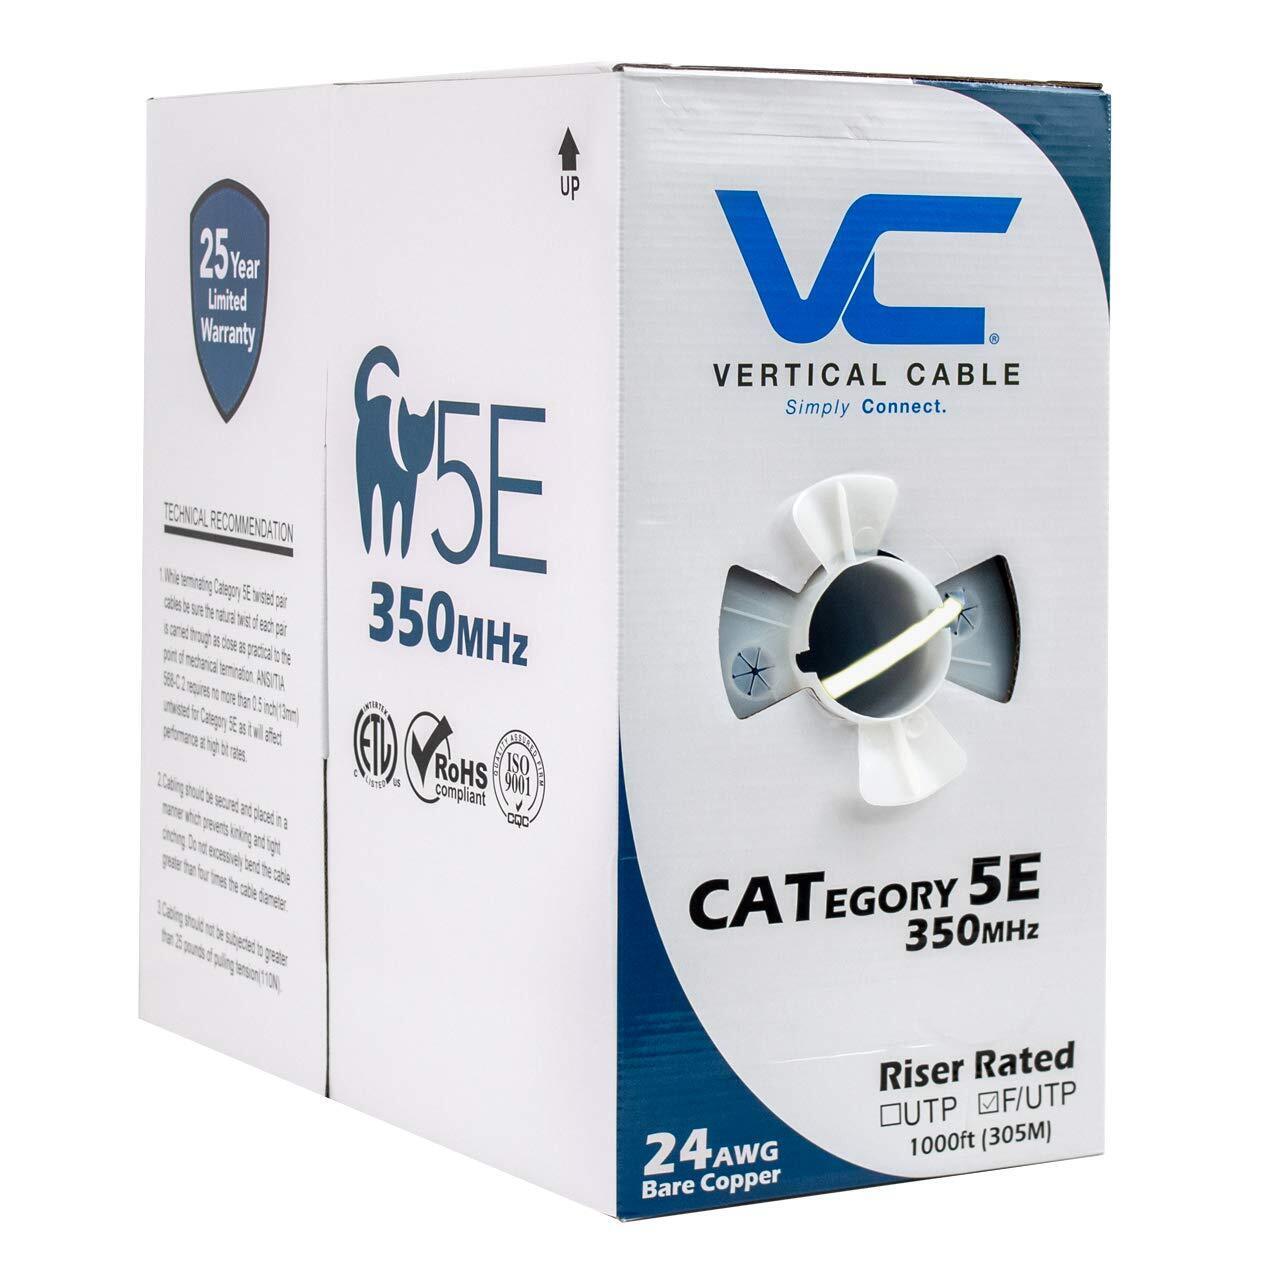 Vertical Cable Cat5e, 350 MHz, Shielded, 24AWG, Solid Bare Copper, 1000ft, Bu...